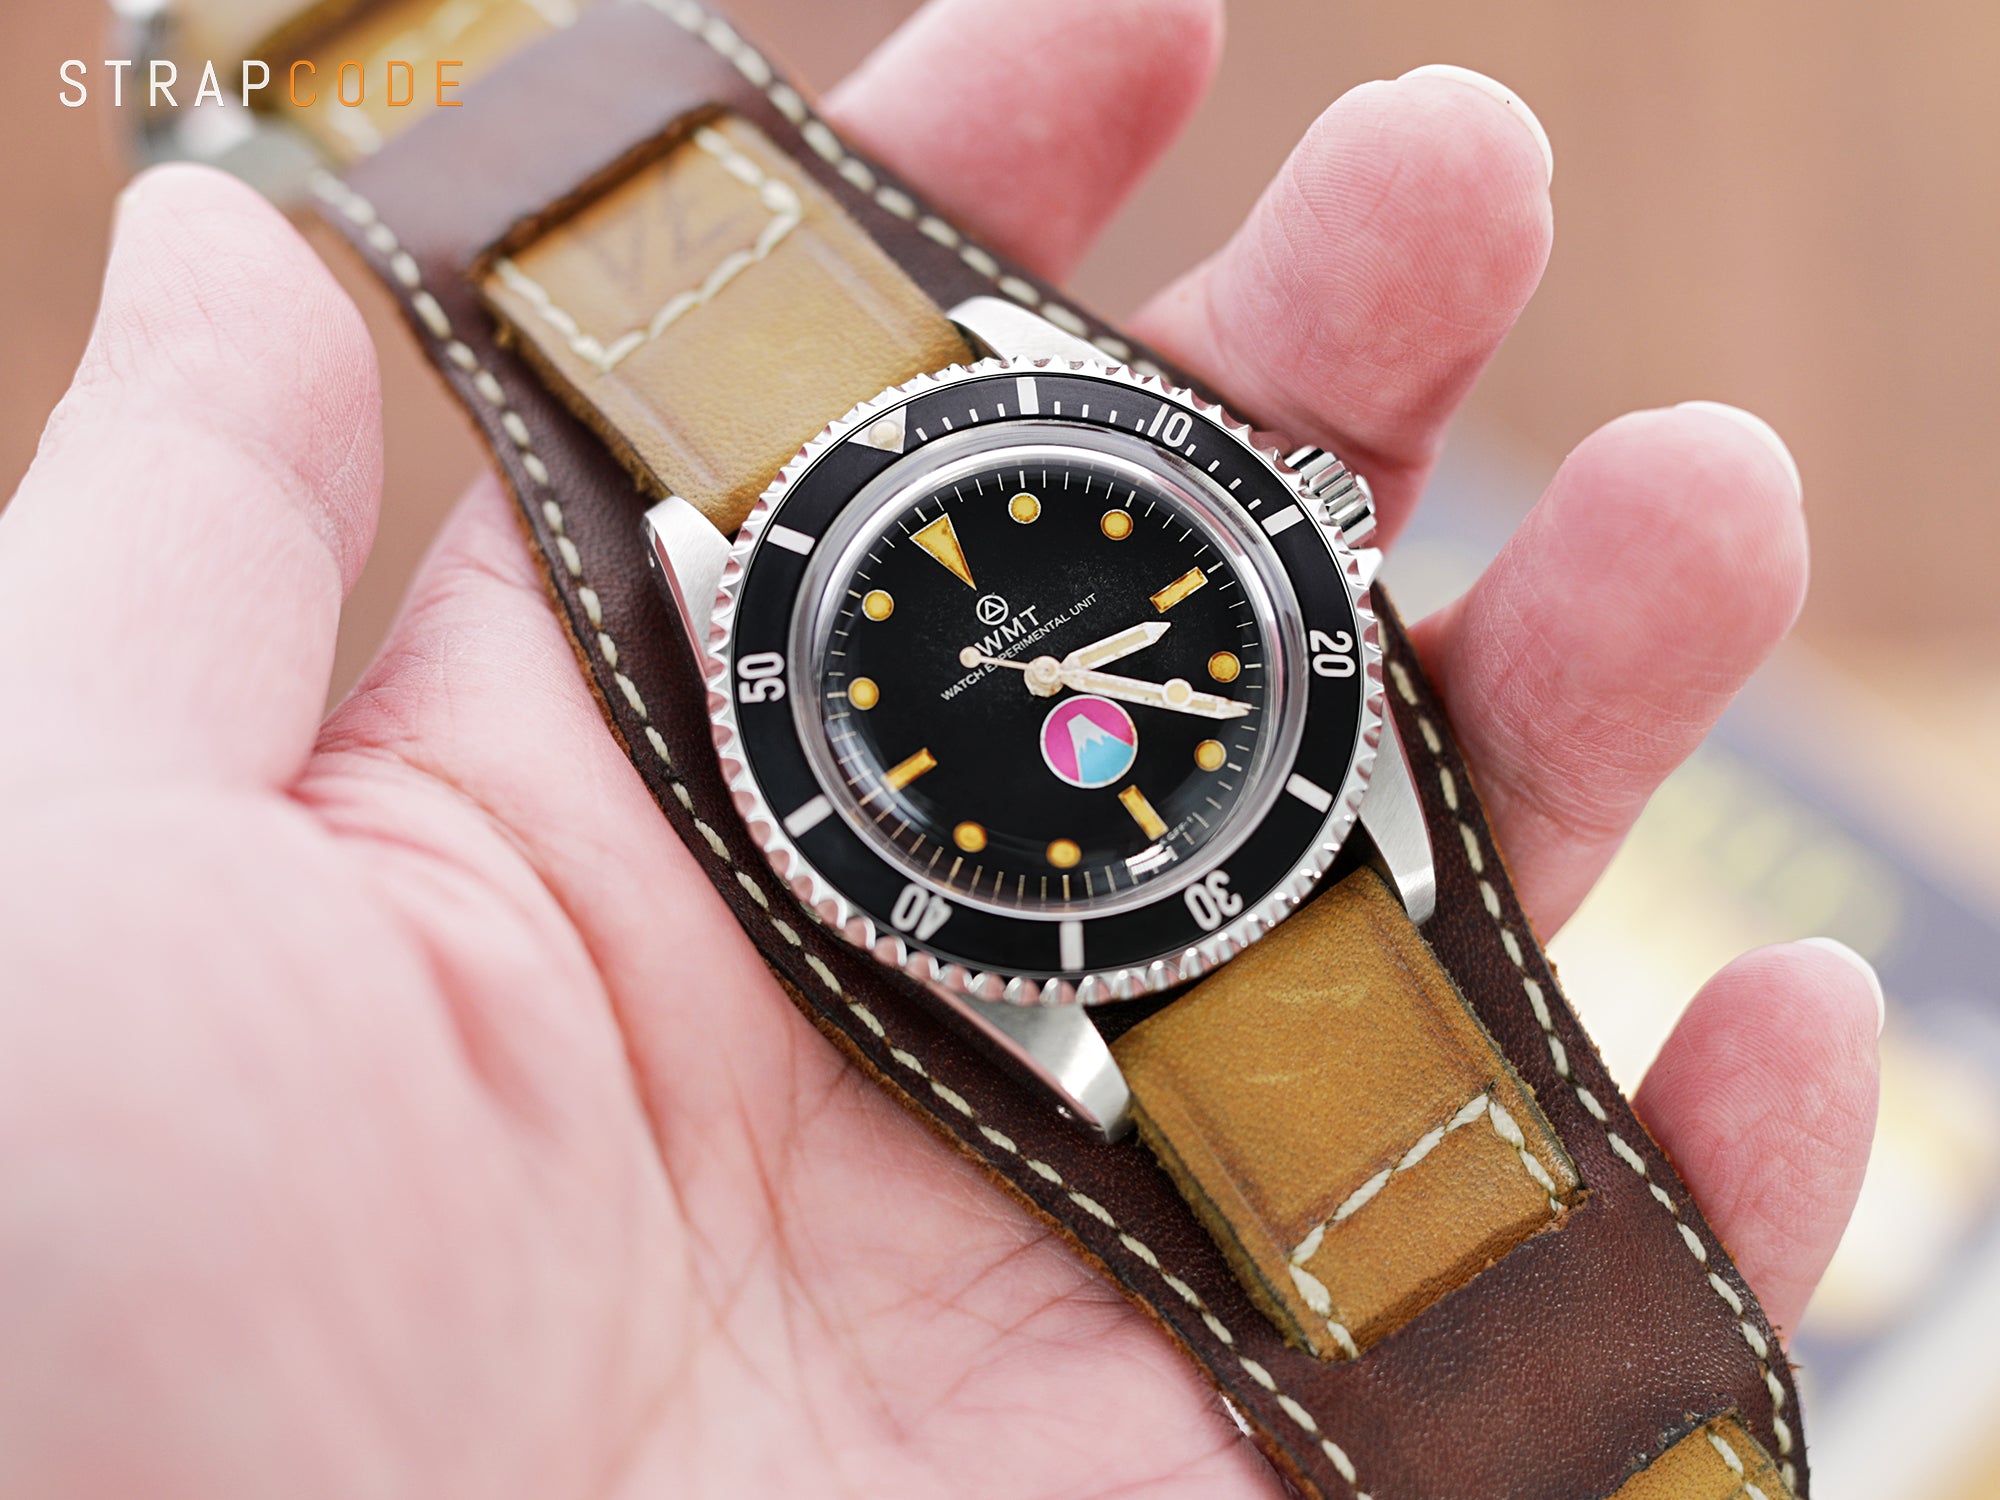 Seiko NH35 Movement, the Reliable Precise Timekeeping | Strapcode